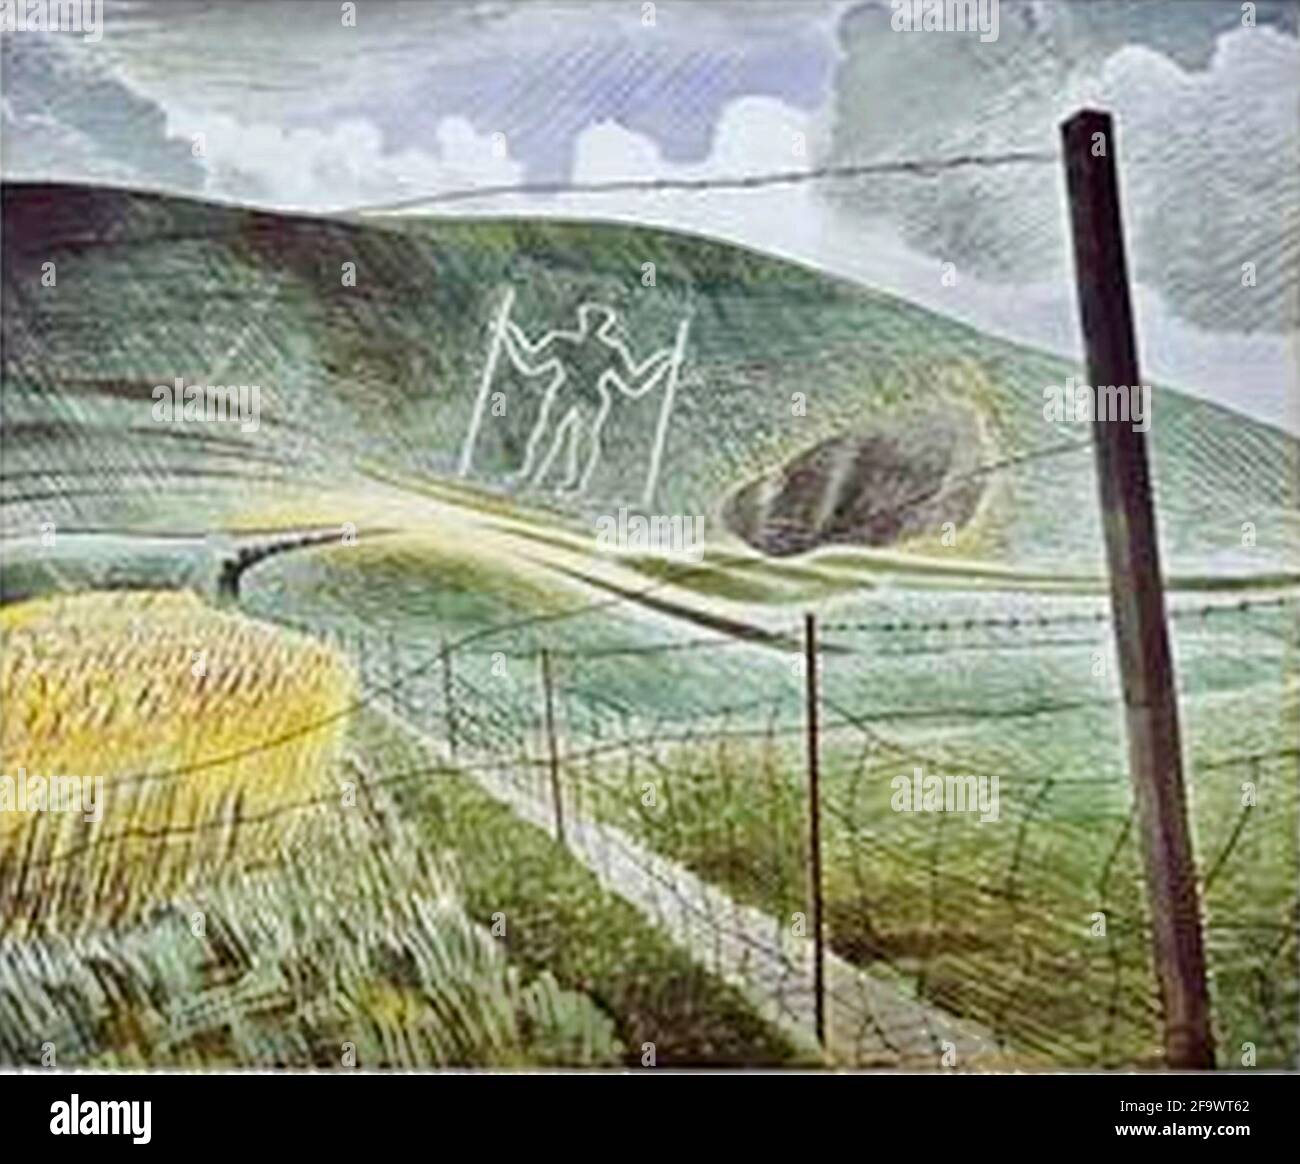 Eric Ravilious artwork entitled The Wilmington Giant. The chalk figure of the Long Man of Wilmington looms over the landscape. Stock Photo